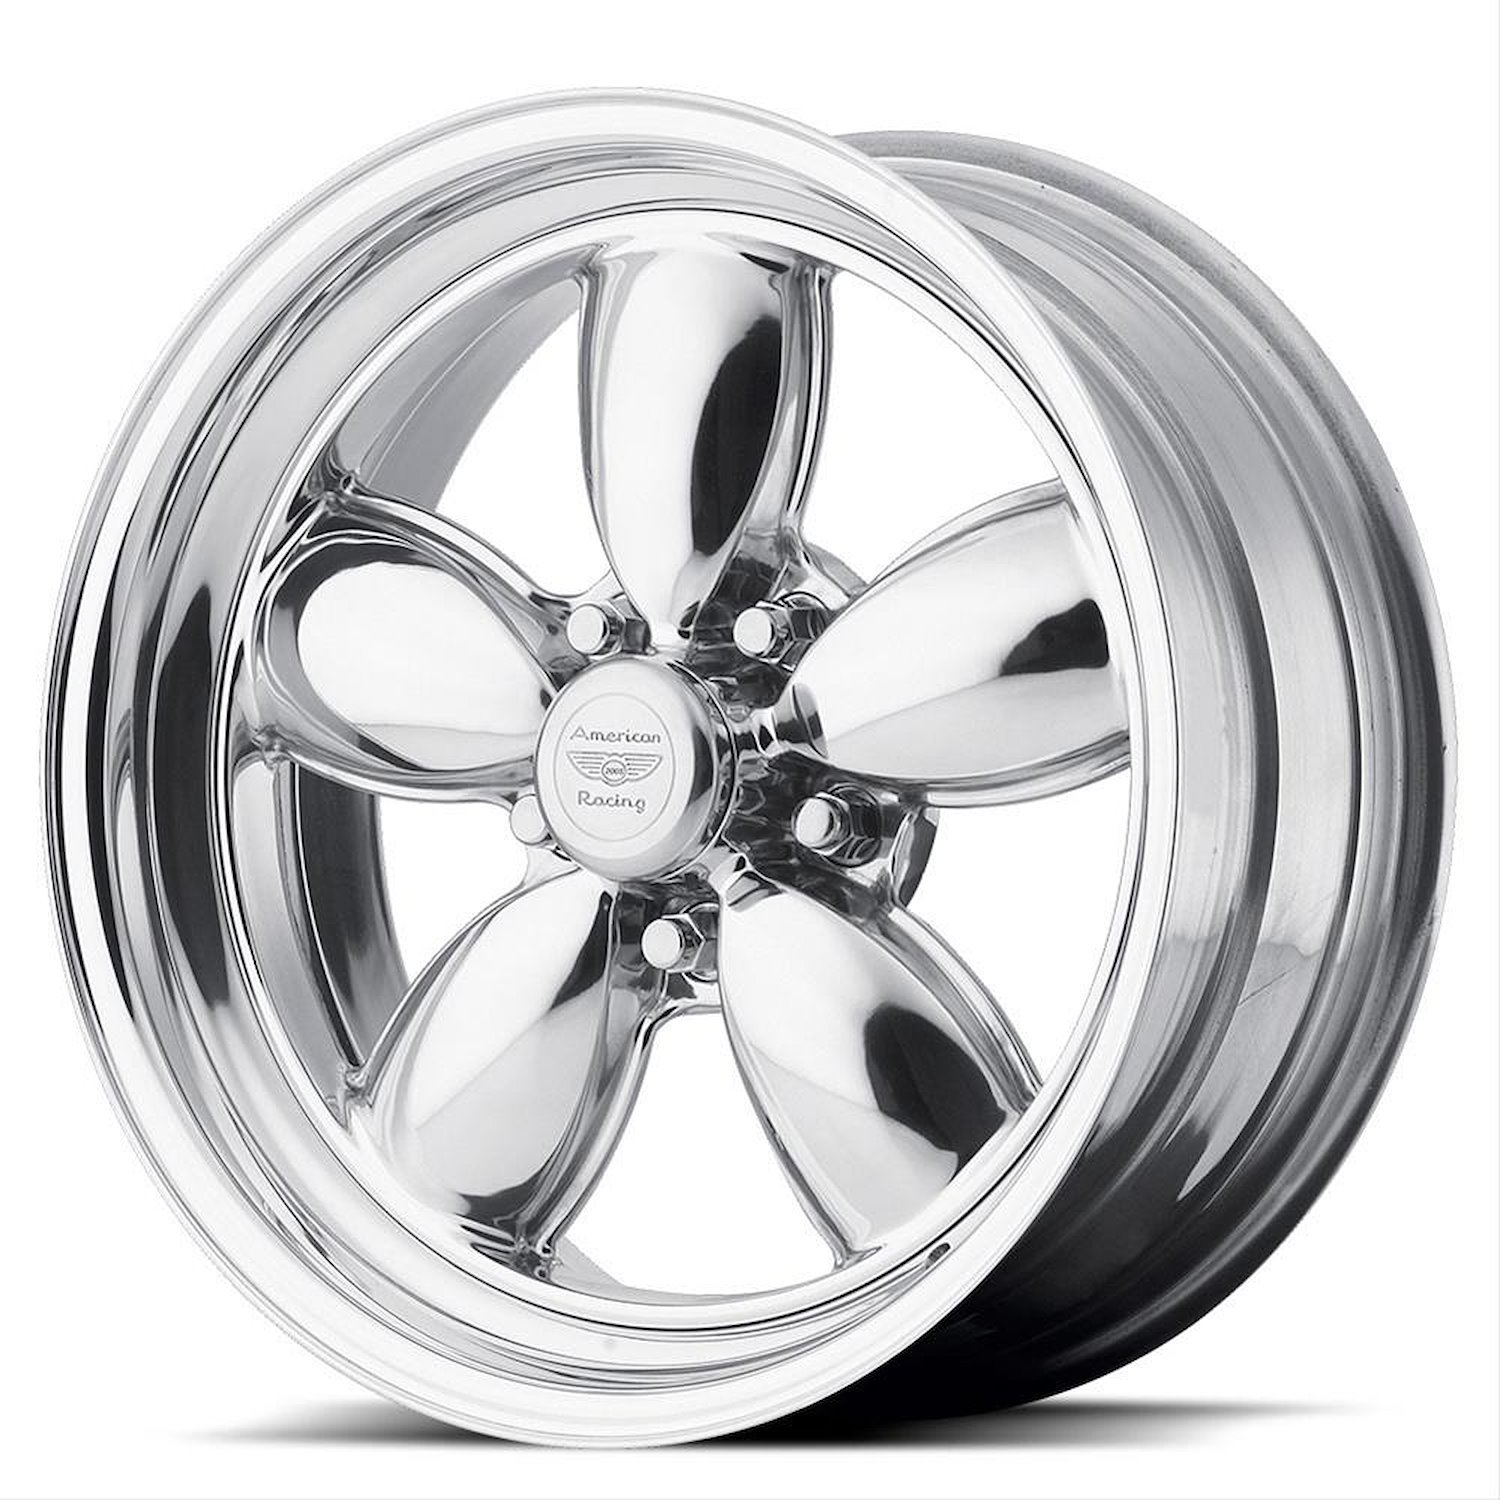 VN420 Classic 200S Wheel Size: 15